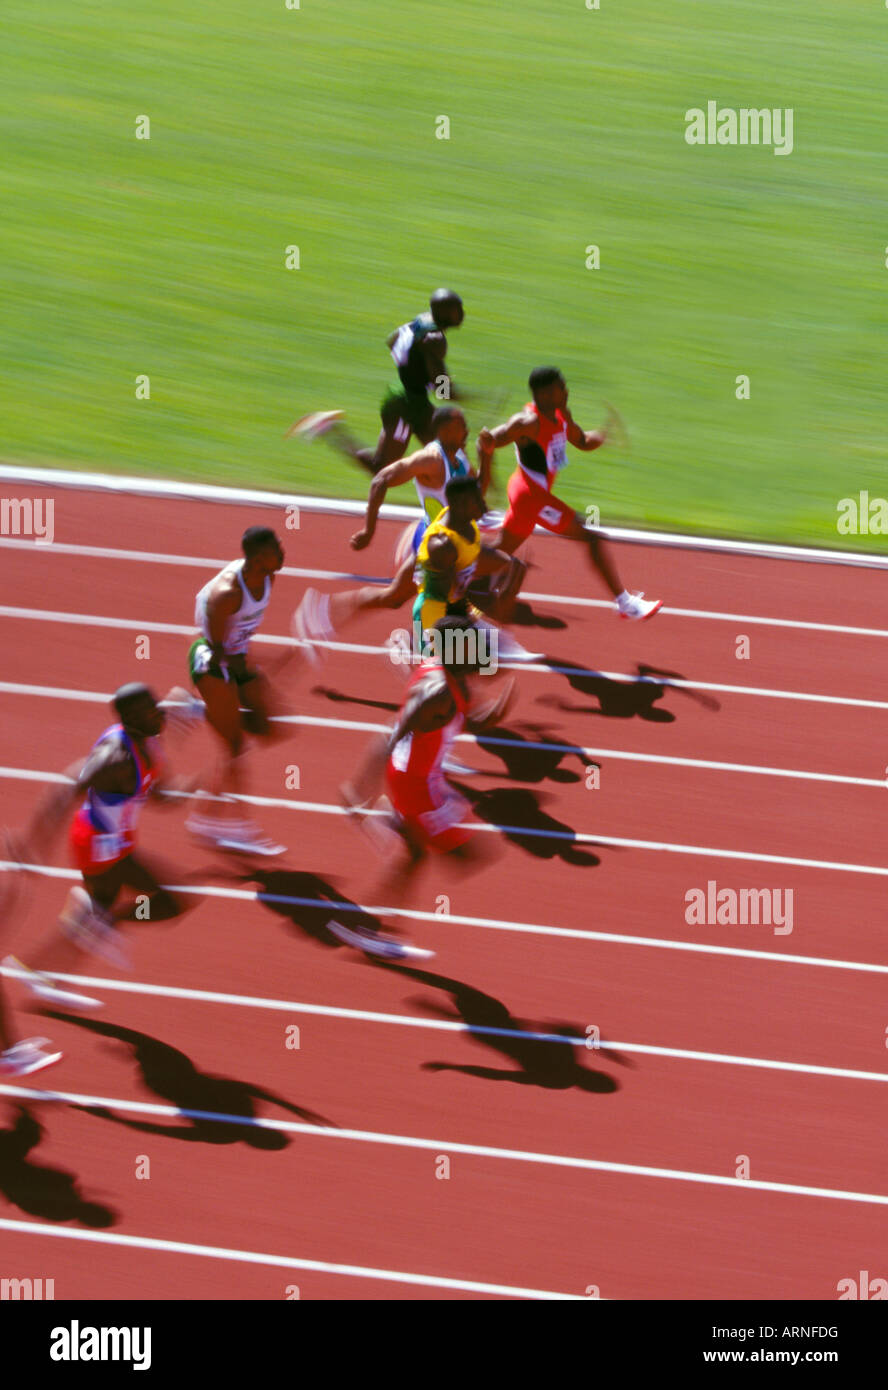 100 M men's sprint at track competion. Motion blur, rust track, British Columbia, Canada. Stock Photo